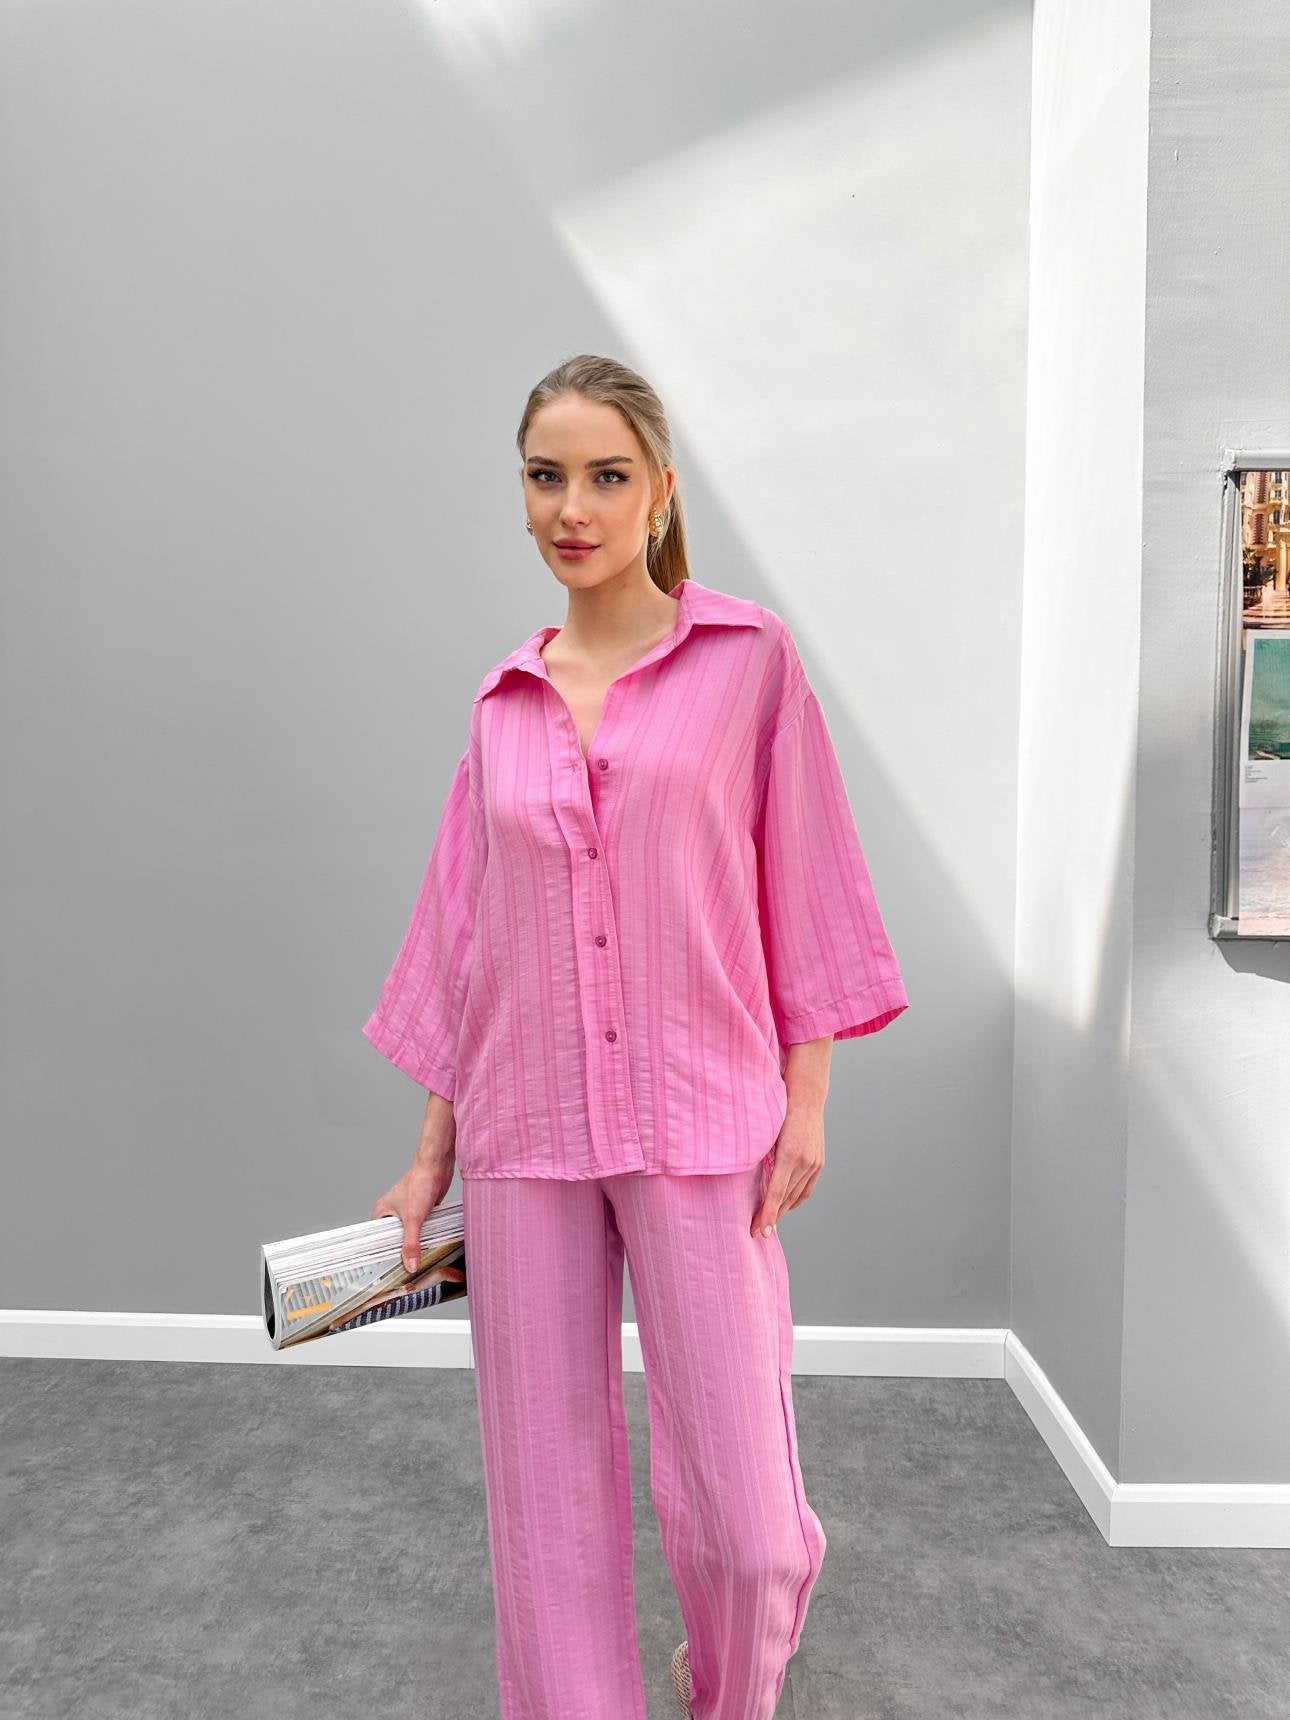 PINK THREE-QUARTE SLEEVE TROUSERS SUIT